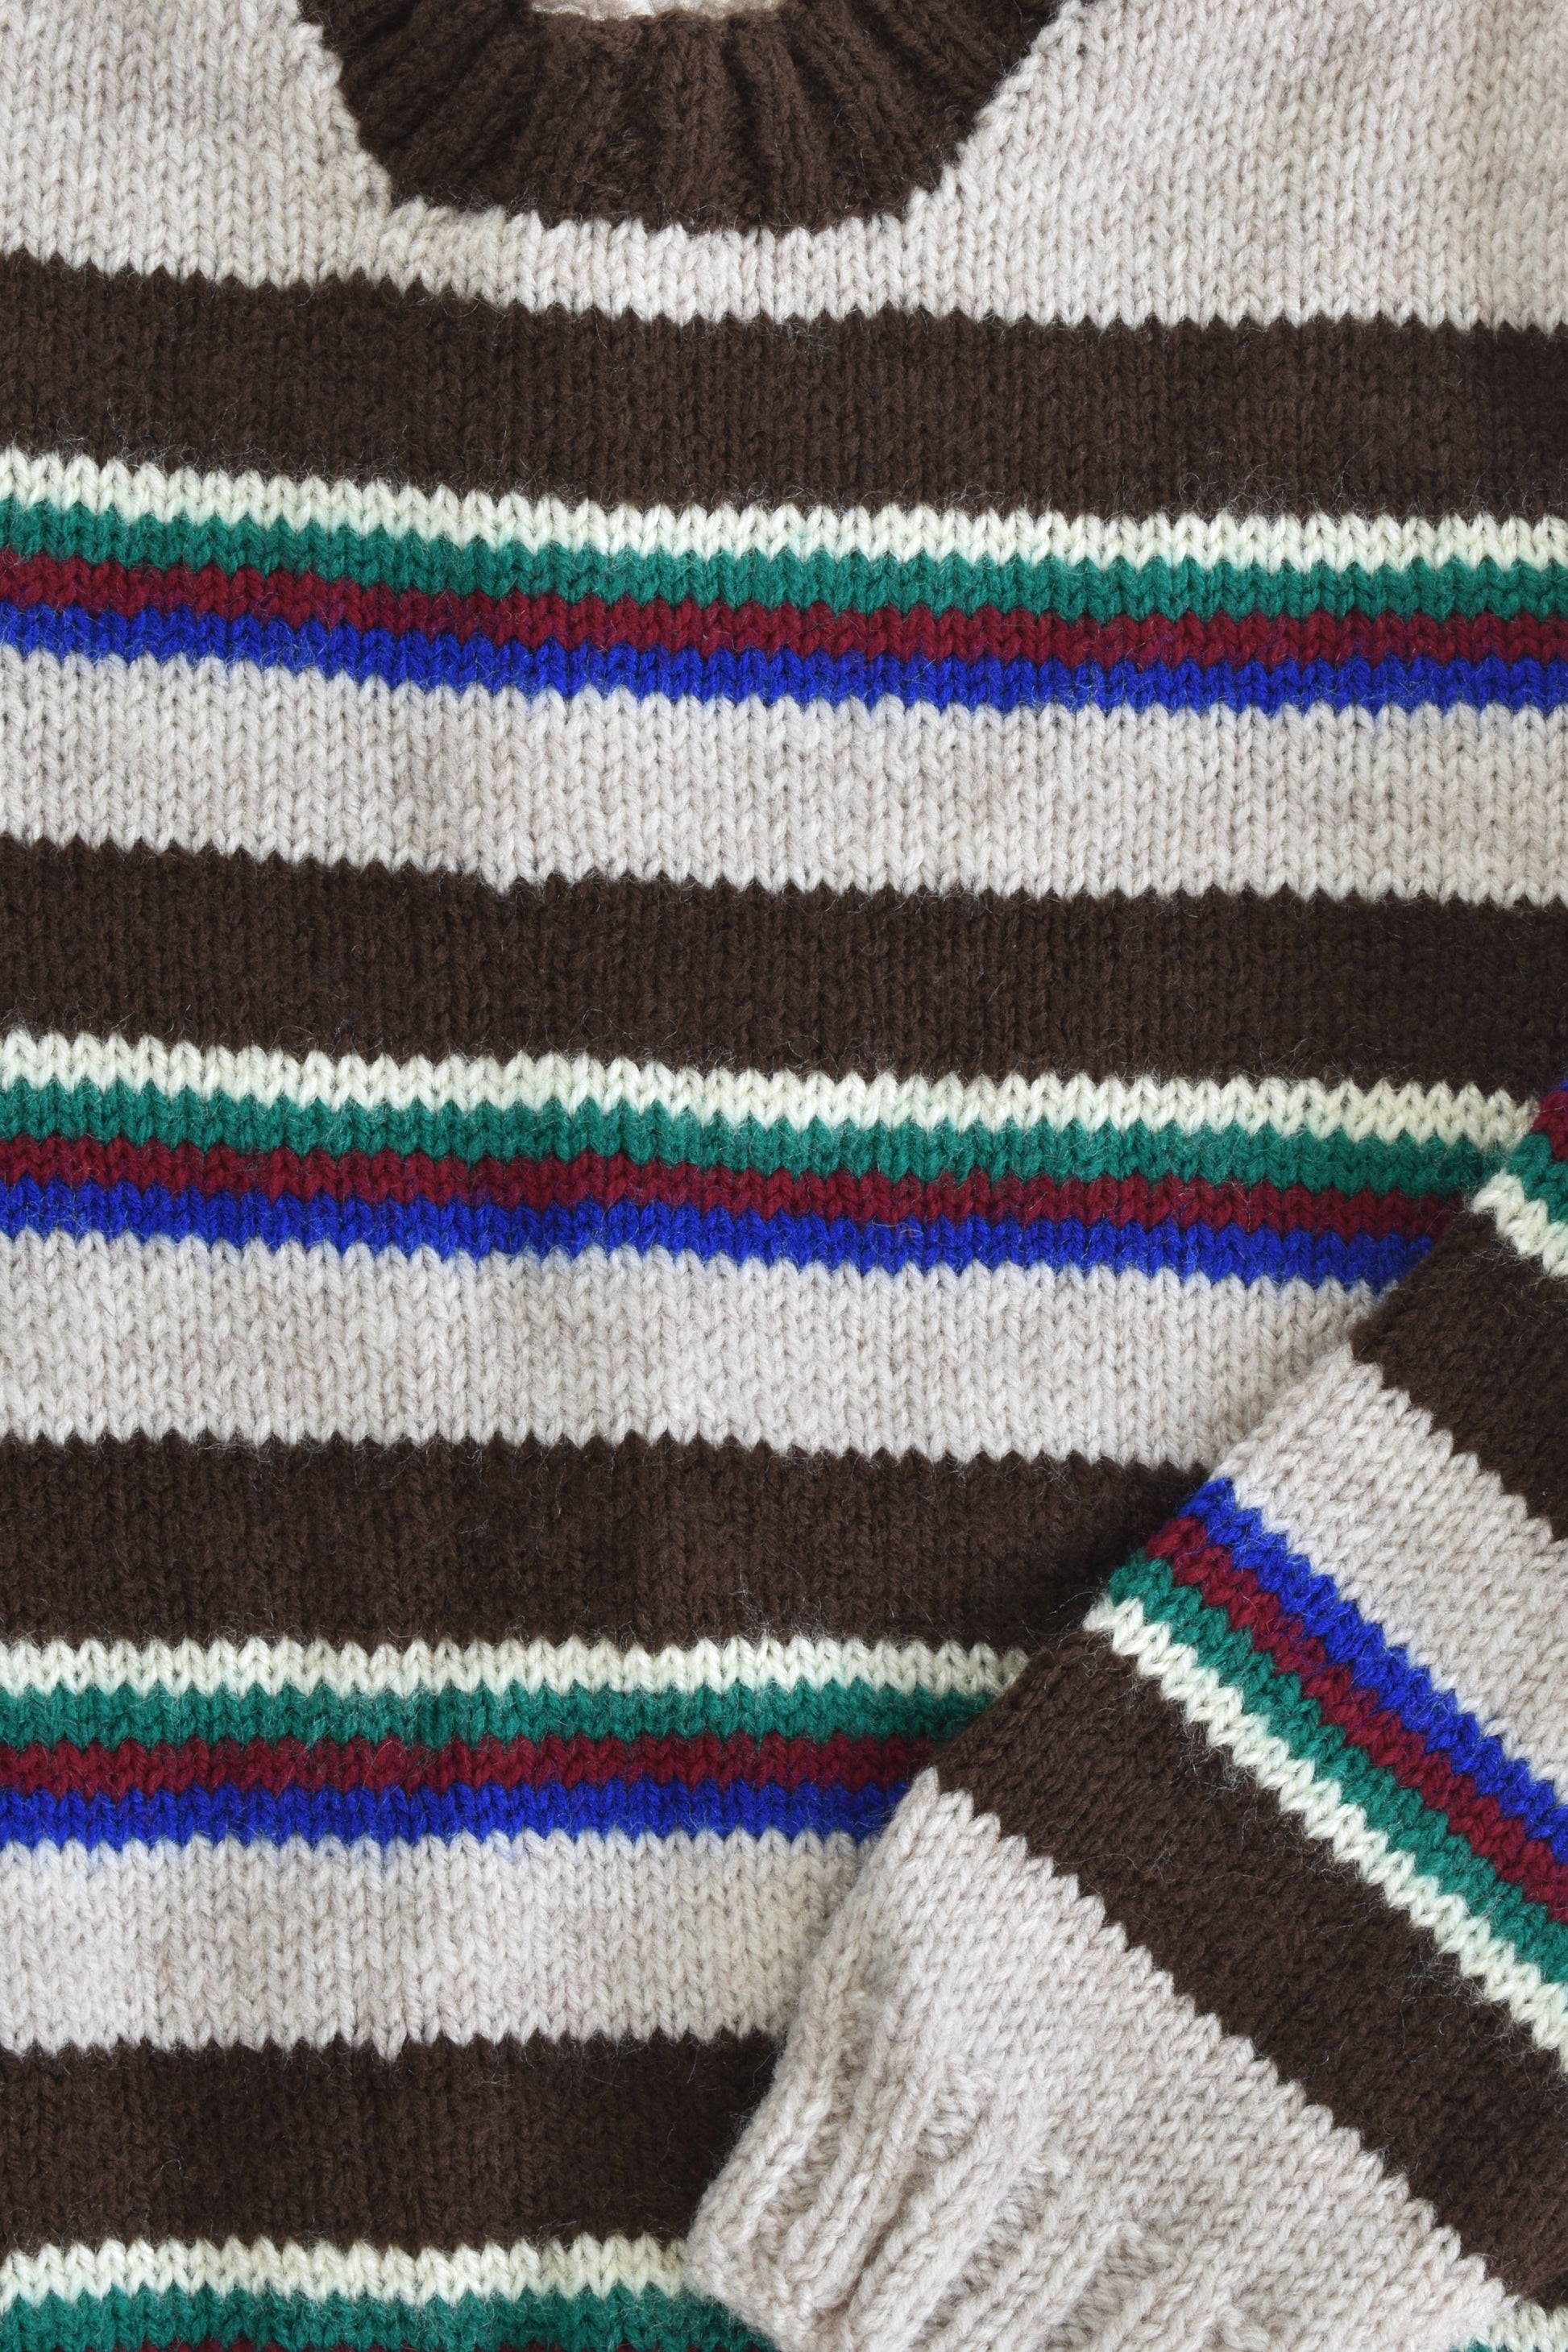 Handmade Size approx 4-5 Knitted Striped Wool Jumper